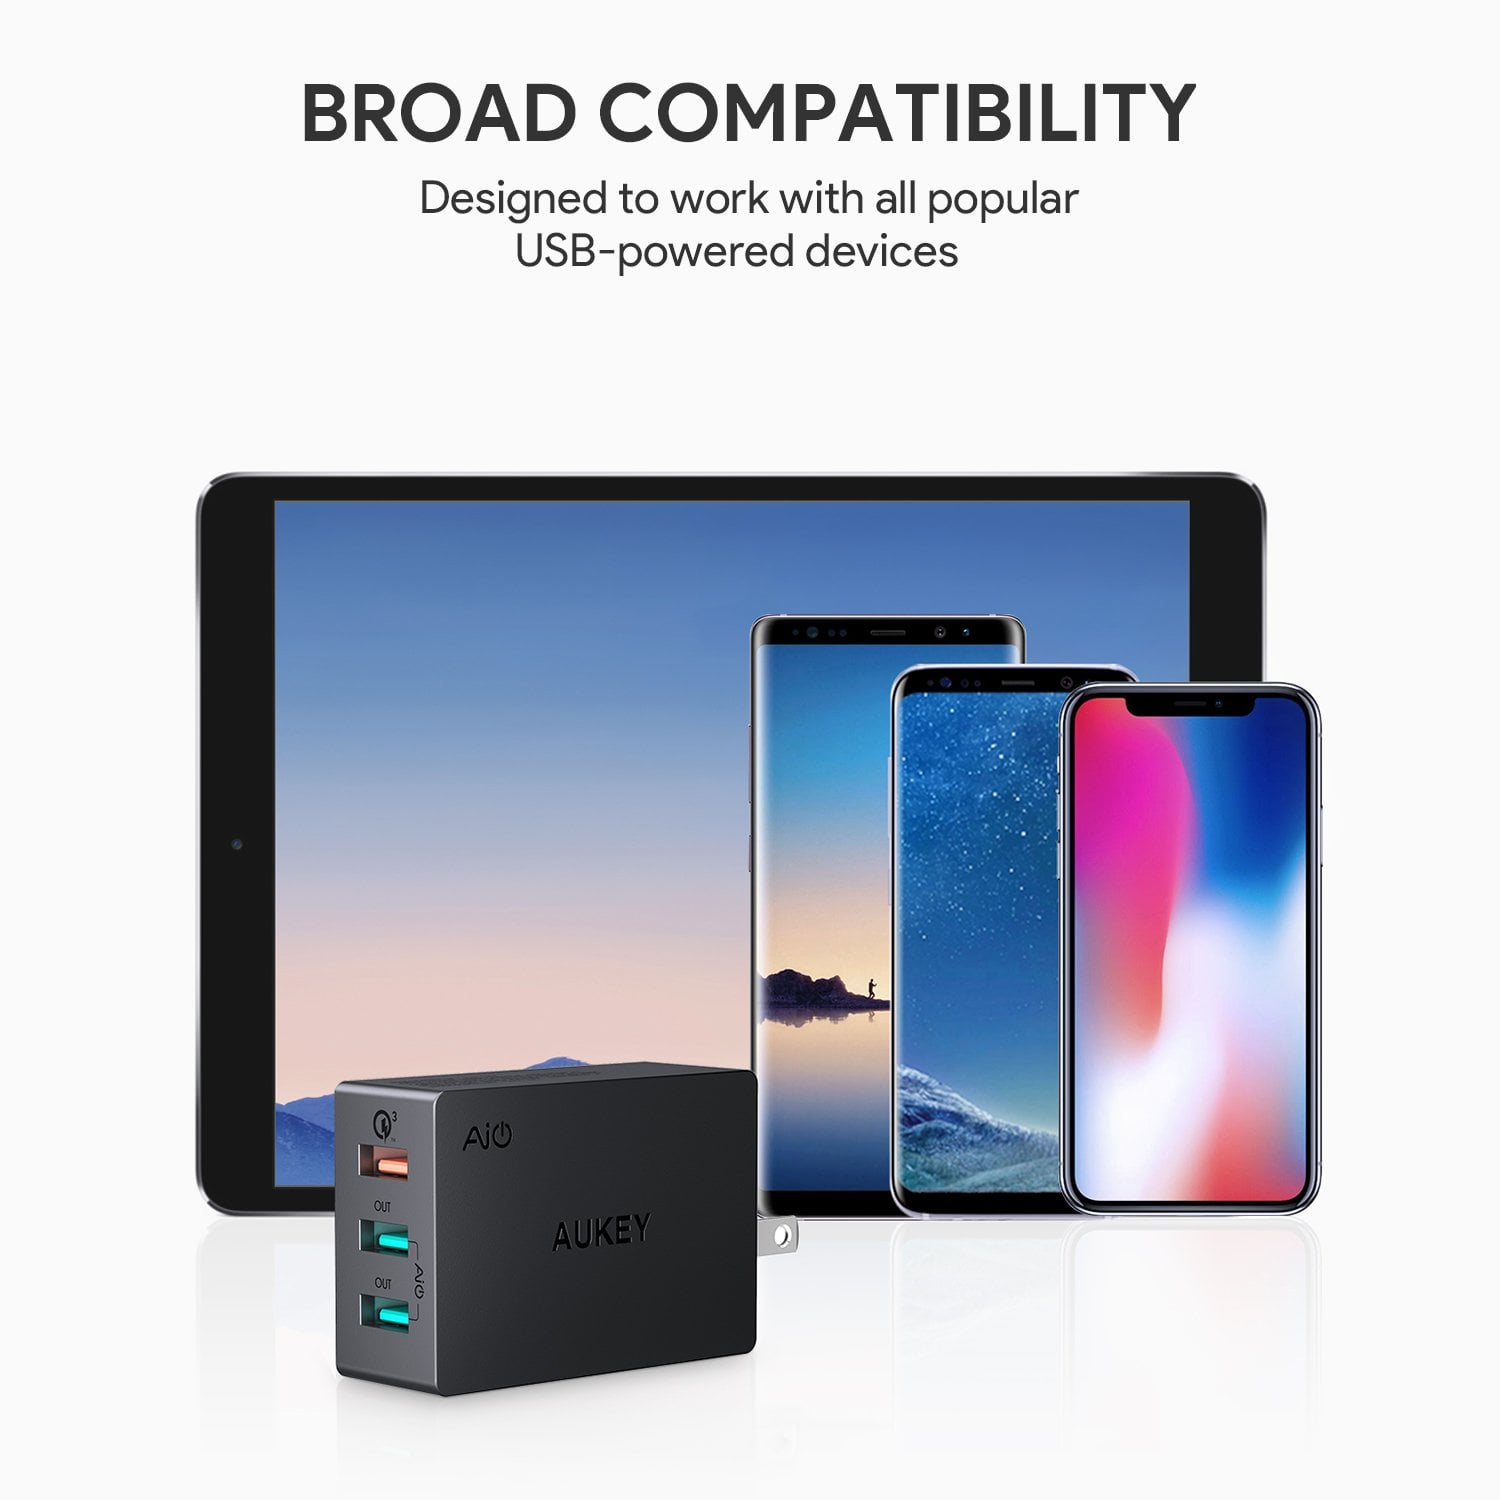 BROAD COMPATIBILITY Designed to work with all popular USB-powered devices